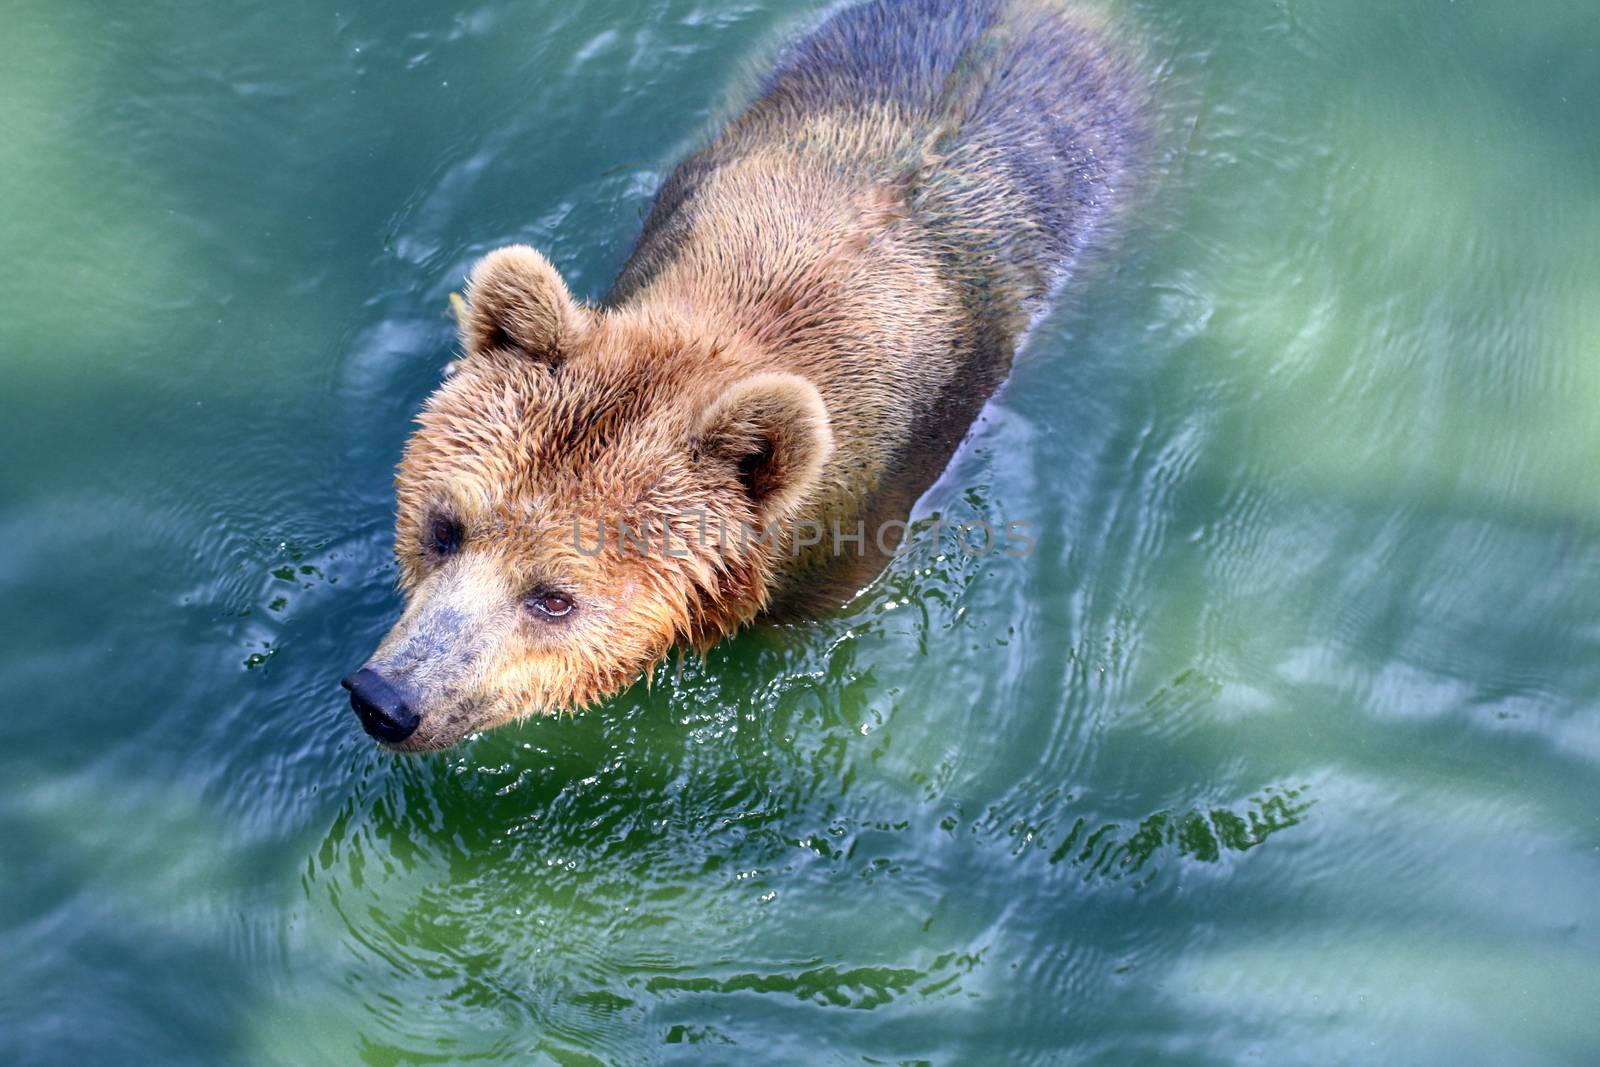 Bear, Grizzly bear in water